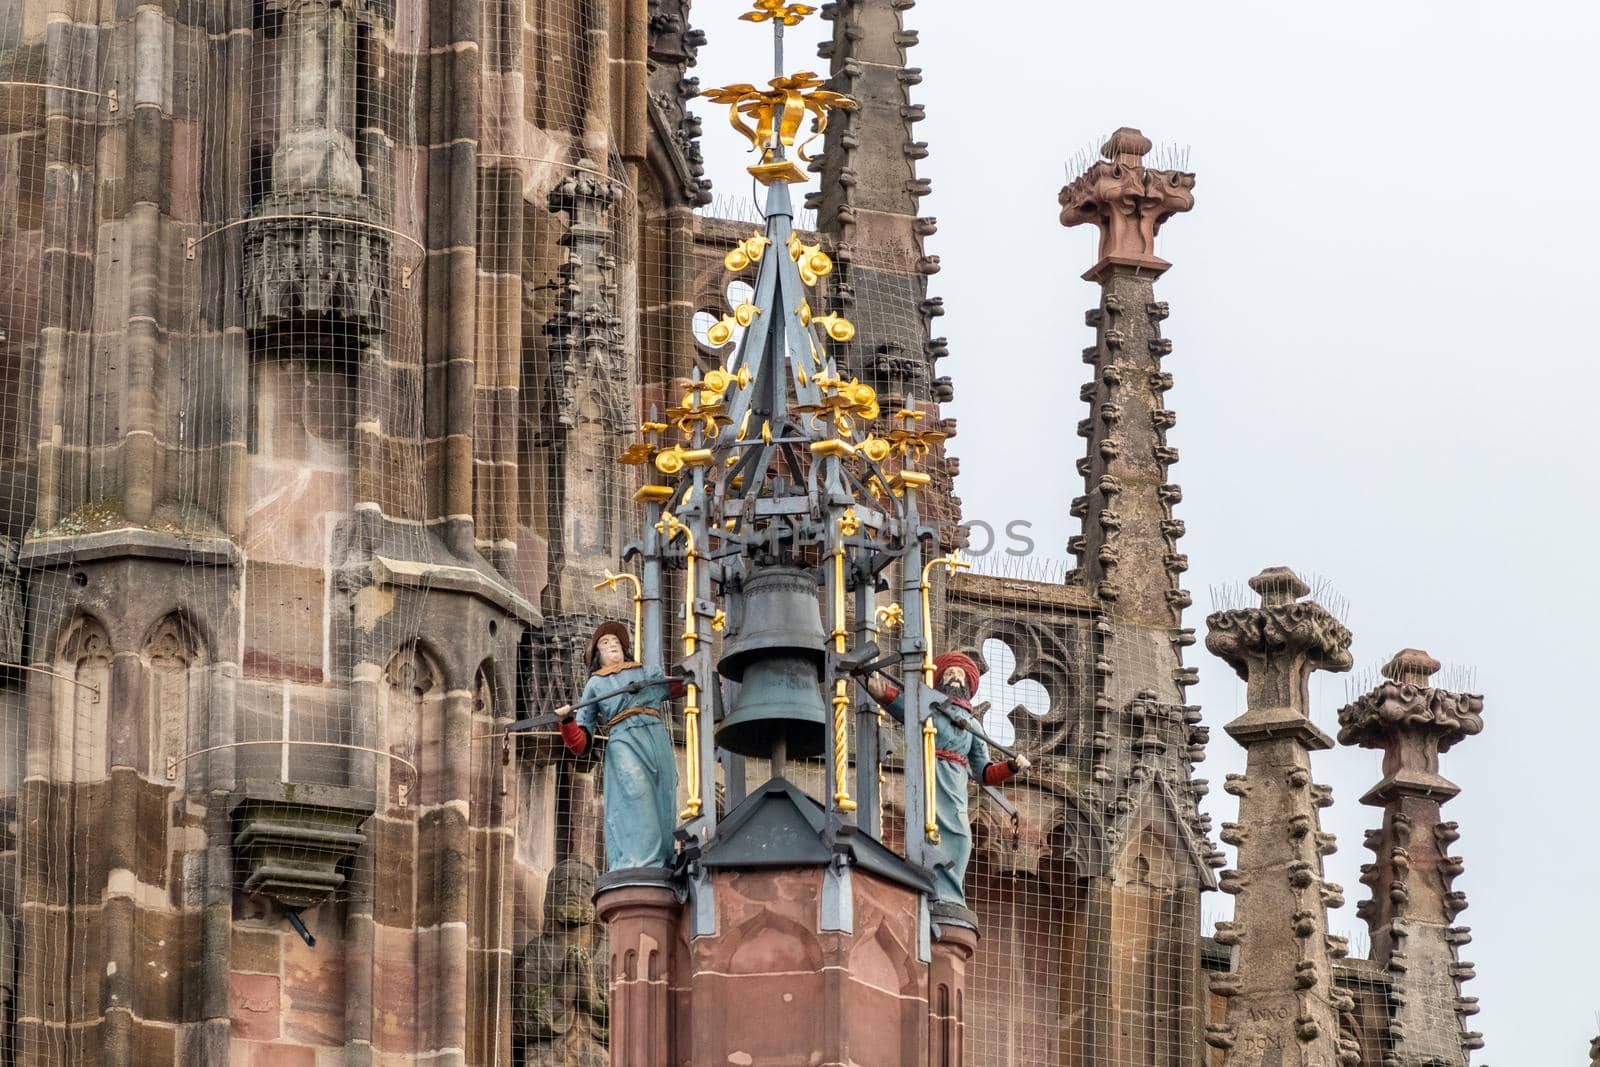 Close-up of bells and other details from the Frauenkirche (woman church) in Nuremberg, Bavaria, Germany by reinerc